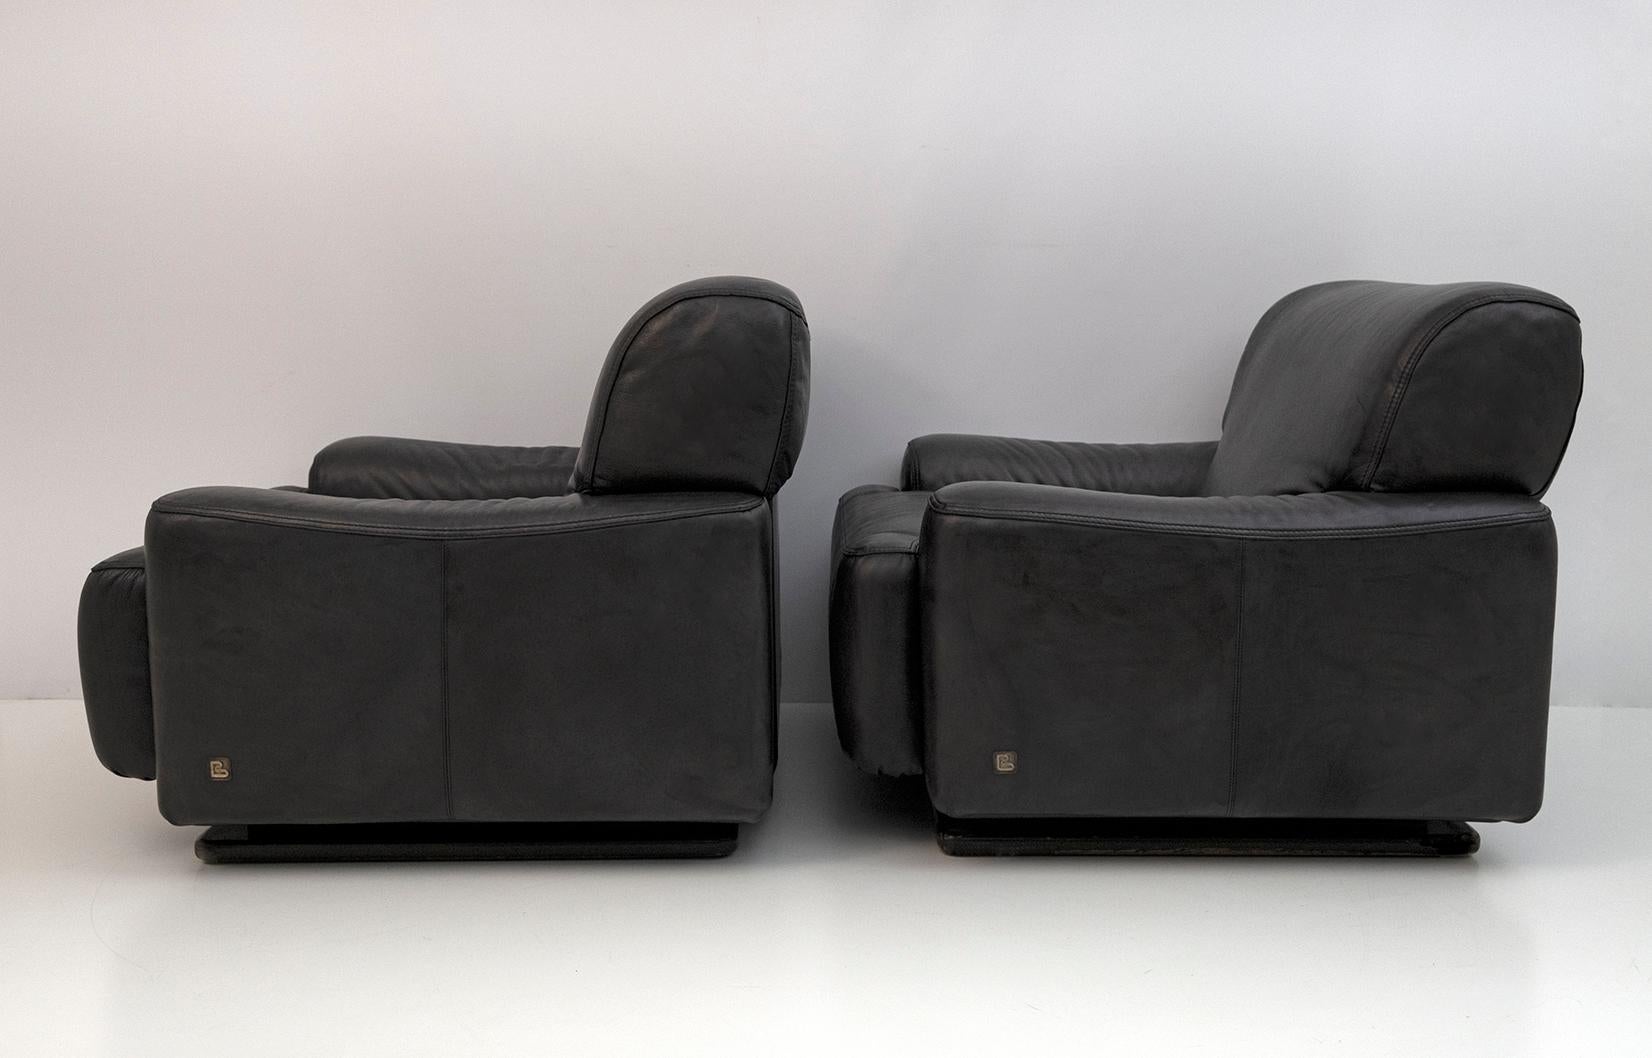 Pair of Busnelli Mid-Century Modern Italian Leather Armchairs, 1970s For Sale 3